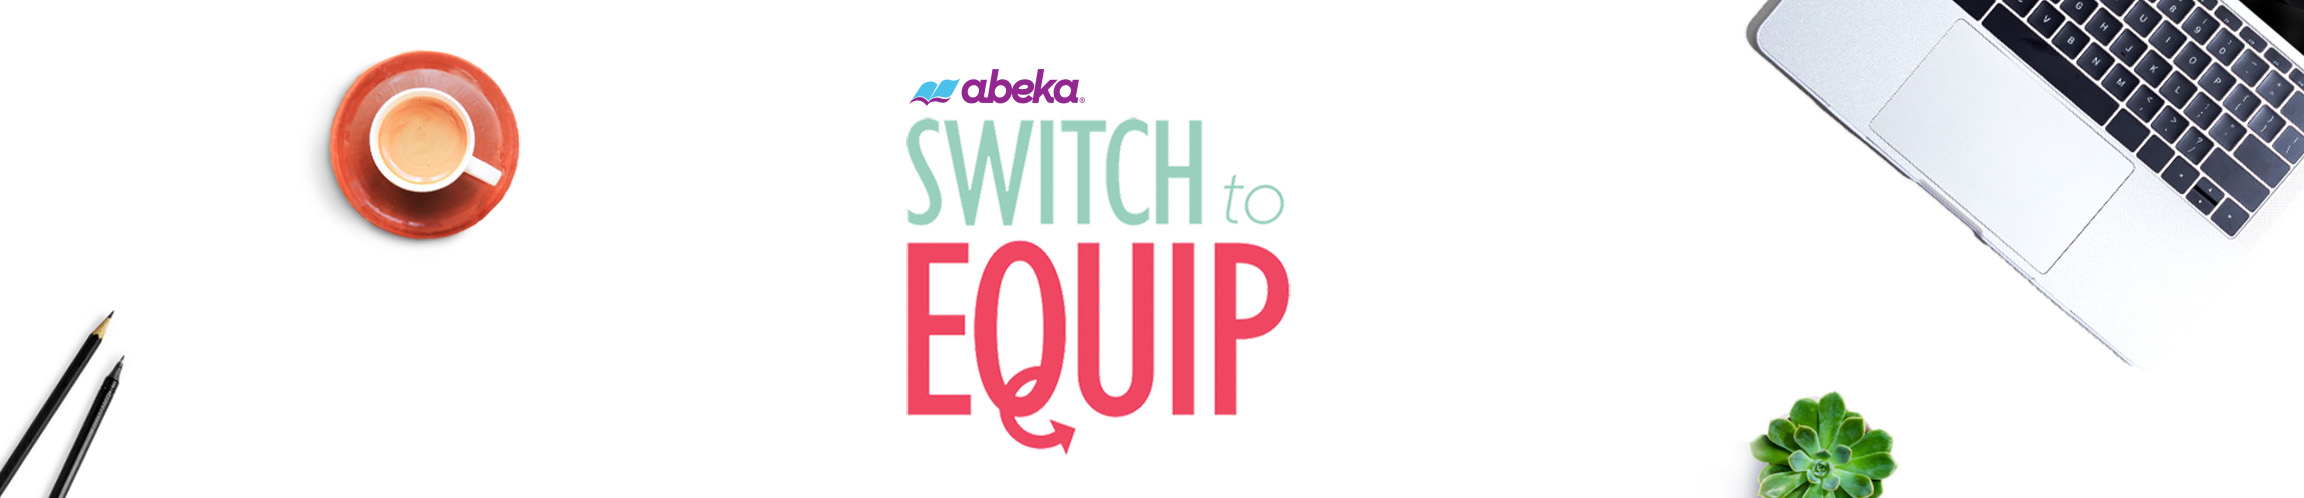 Abeka Switch to Equip